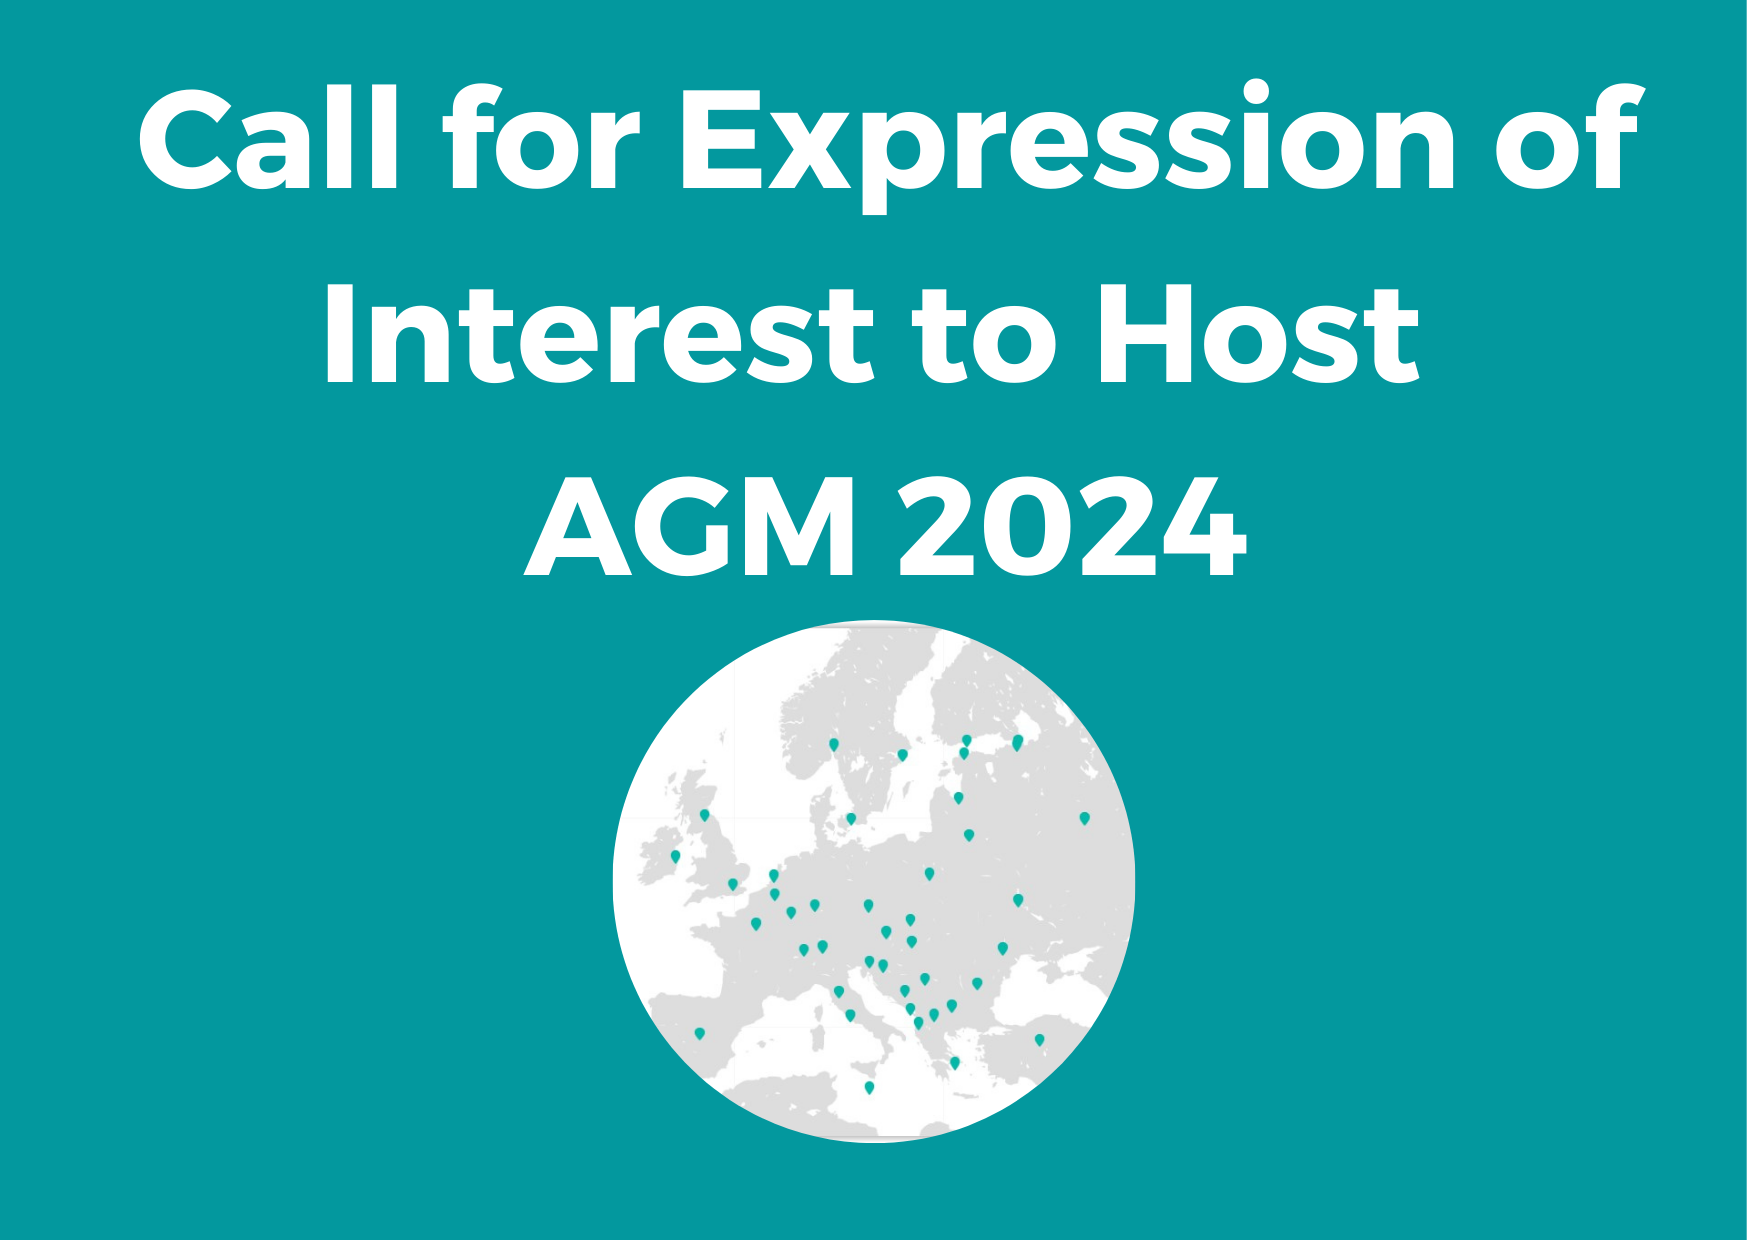 Where will CENL meet in 2024? Call for expression of interest to host